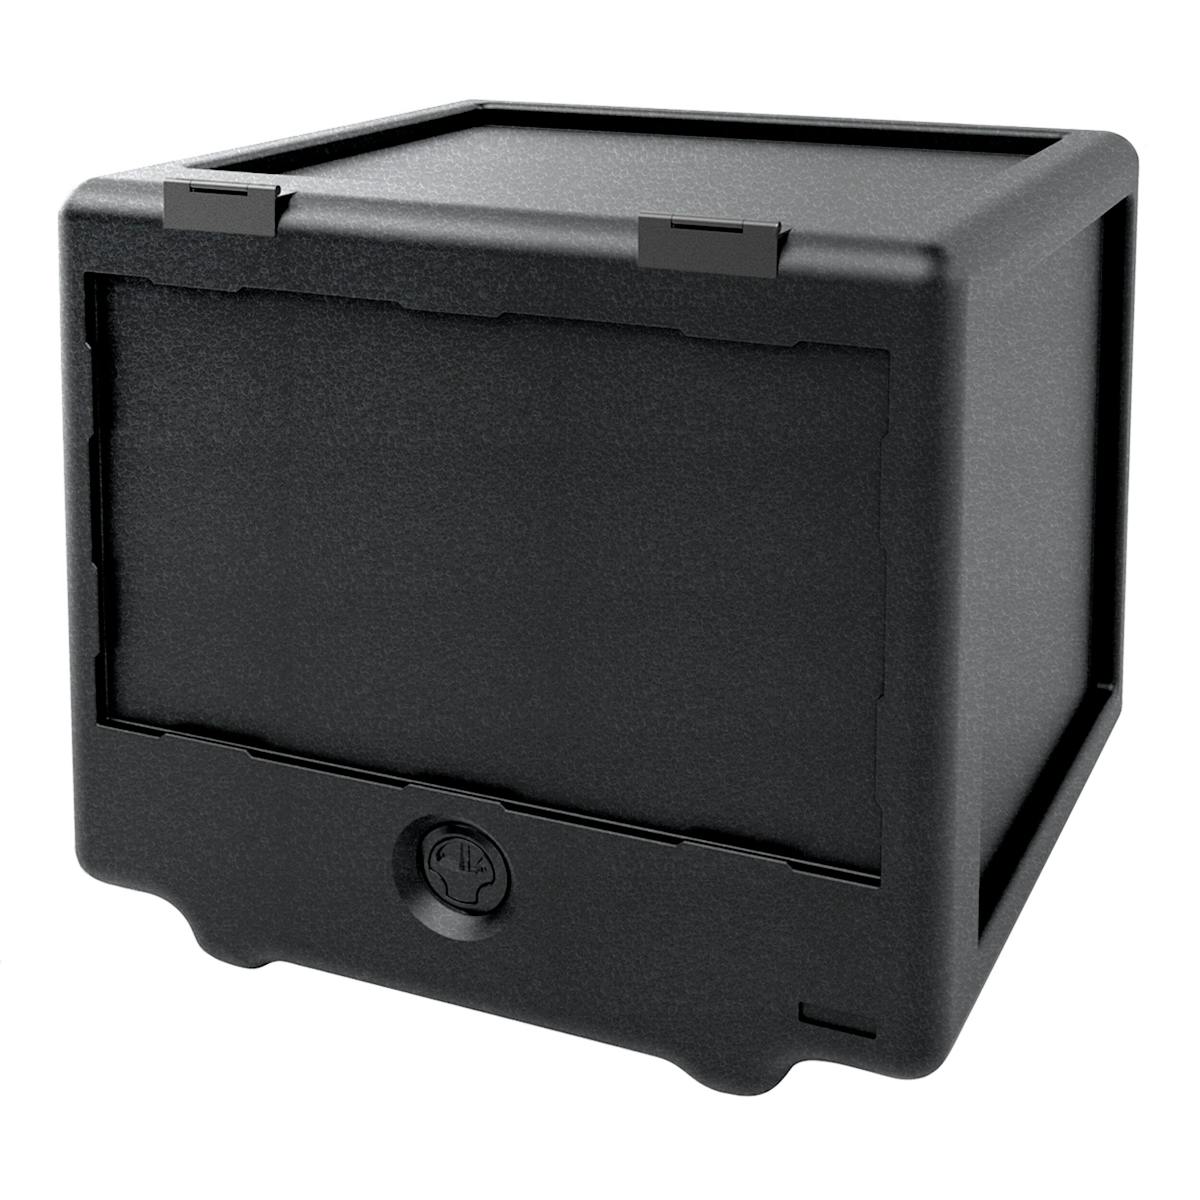 Thermobox front loader | Delivery box for couriers | Styrofoam box | Polibox - 100 litres	